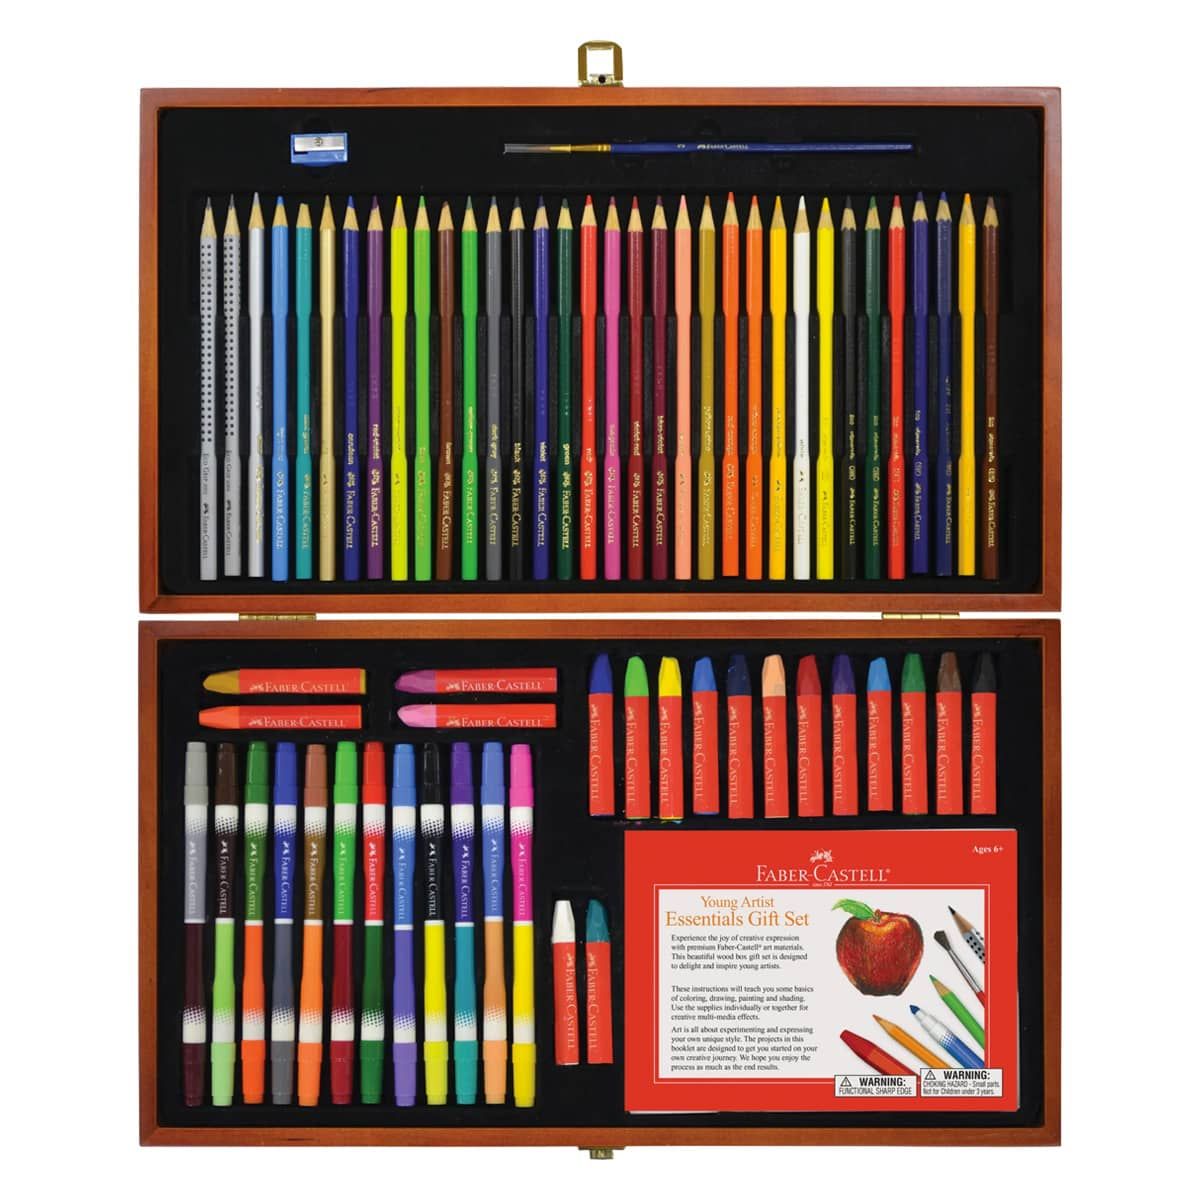 The drawing set which contains everything a young artist needs!